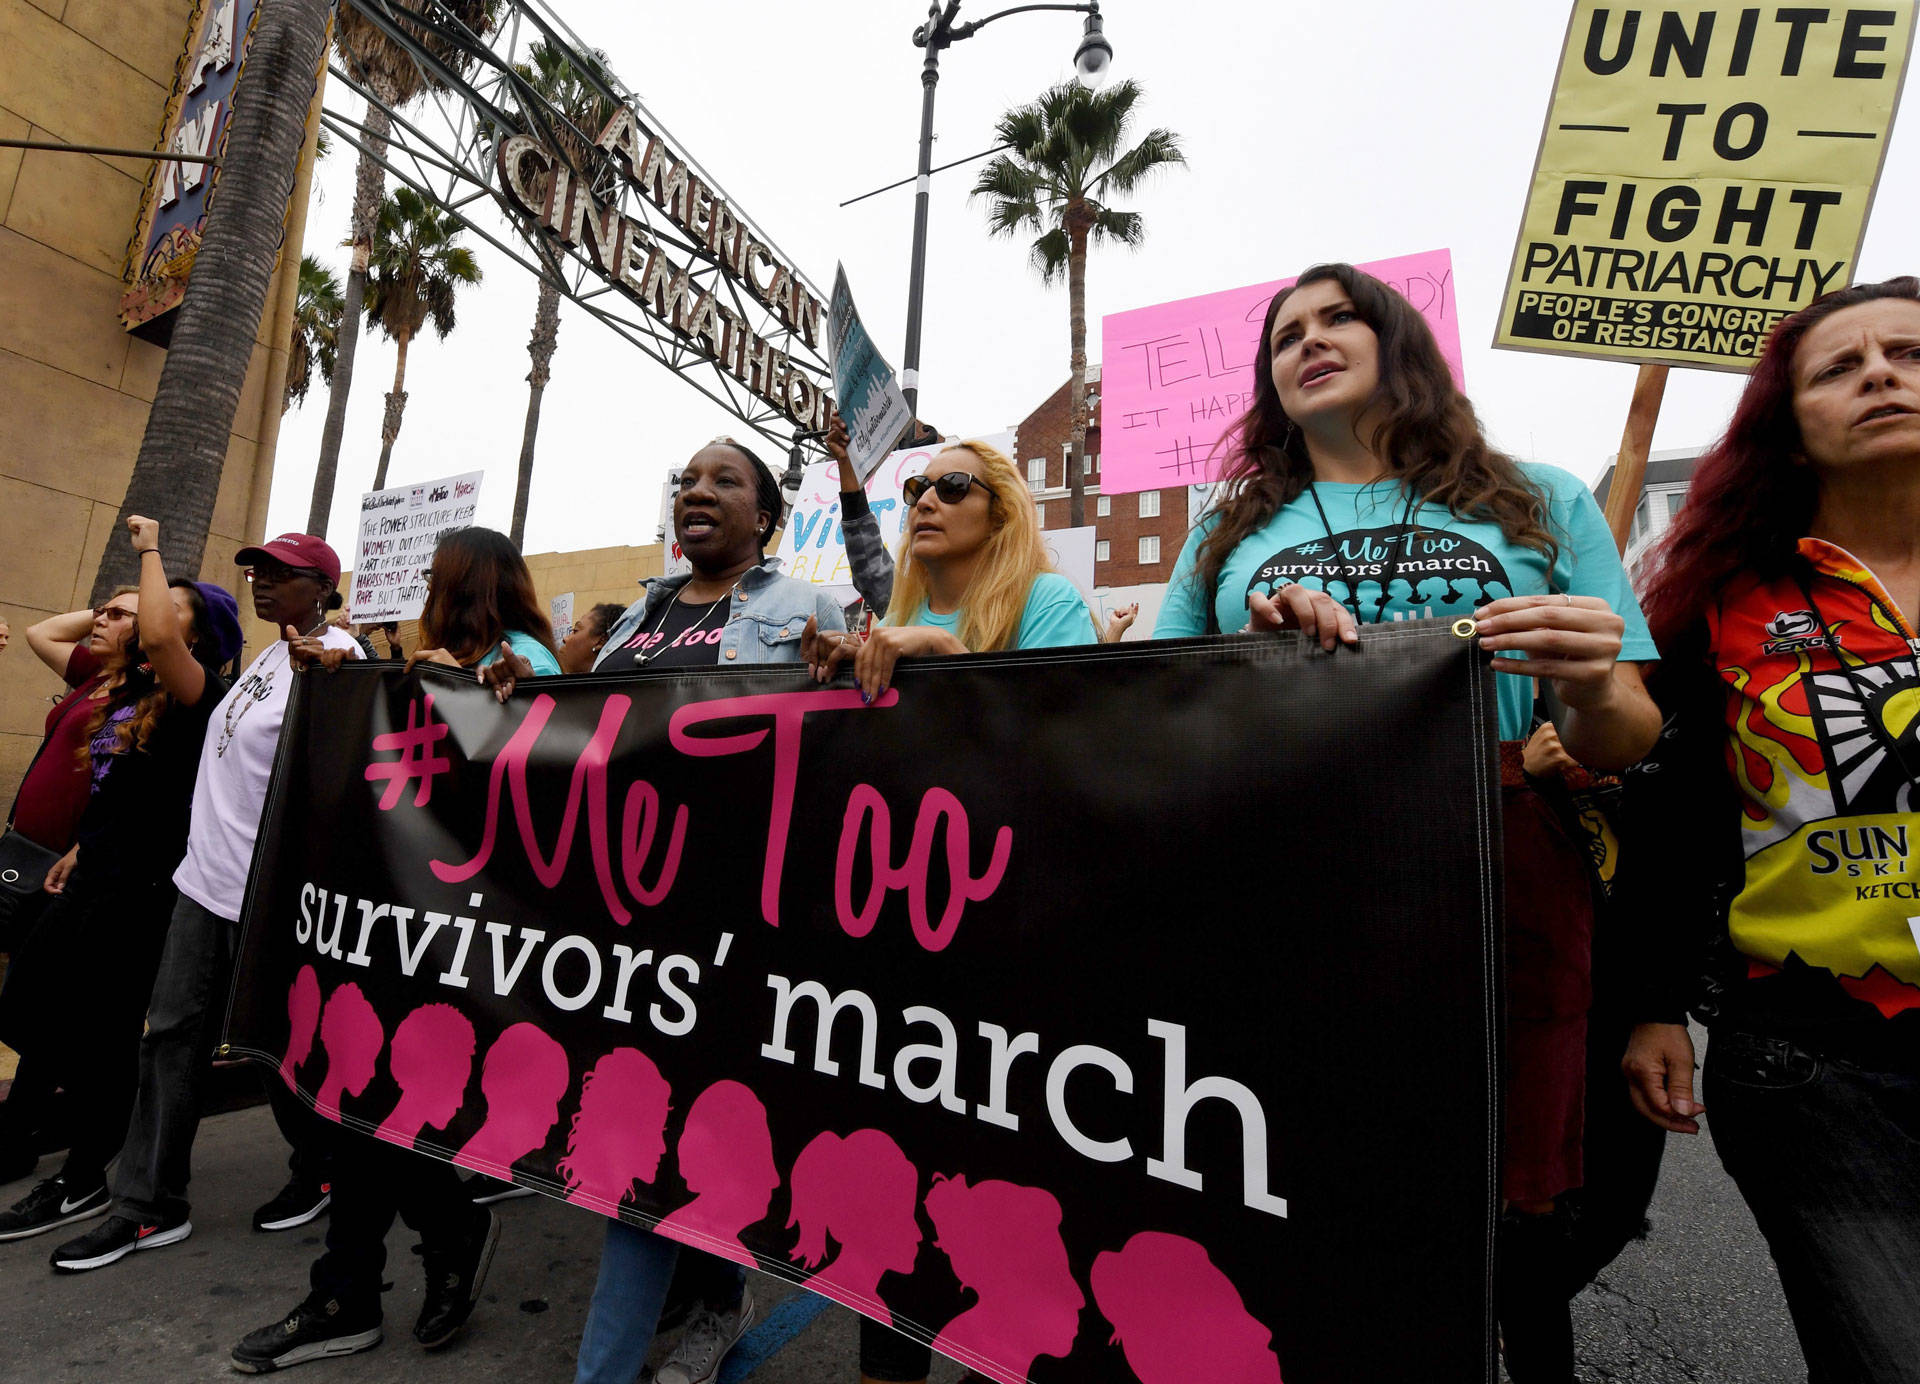 Victims of sexual harassment, sexual assault, sexual abuse and their supporters protest during a #MeToo march in Hollywood on Nov. 12, 2017. MARK RALSTON/AFP/Getty Images